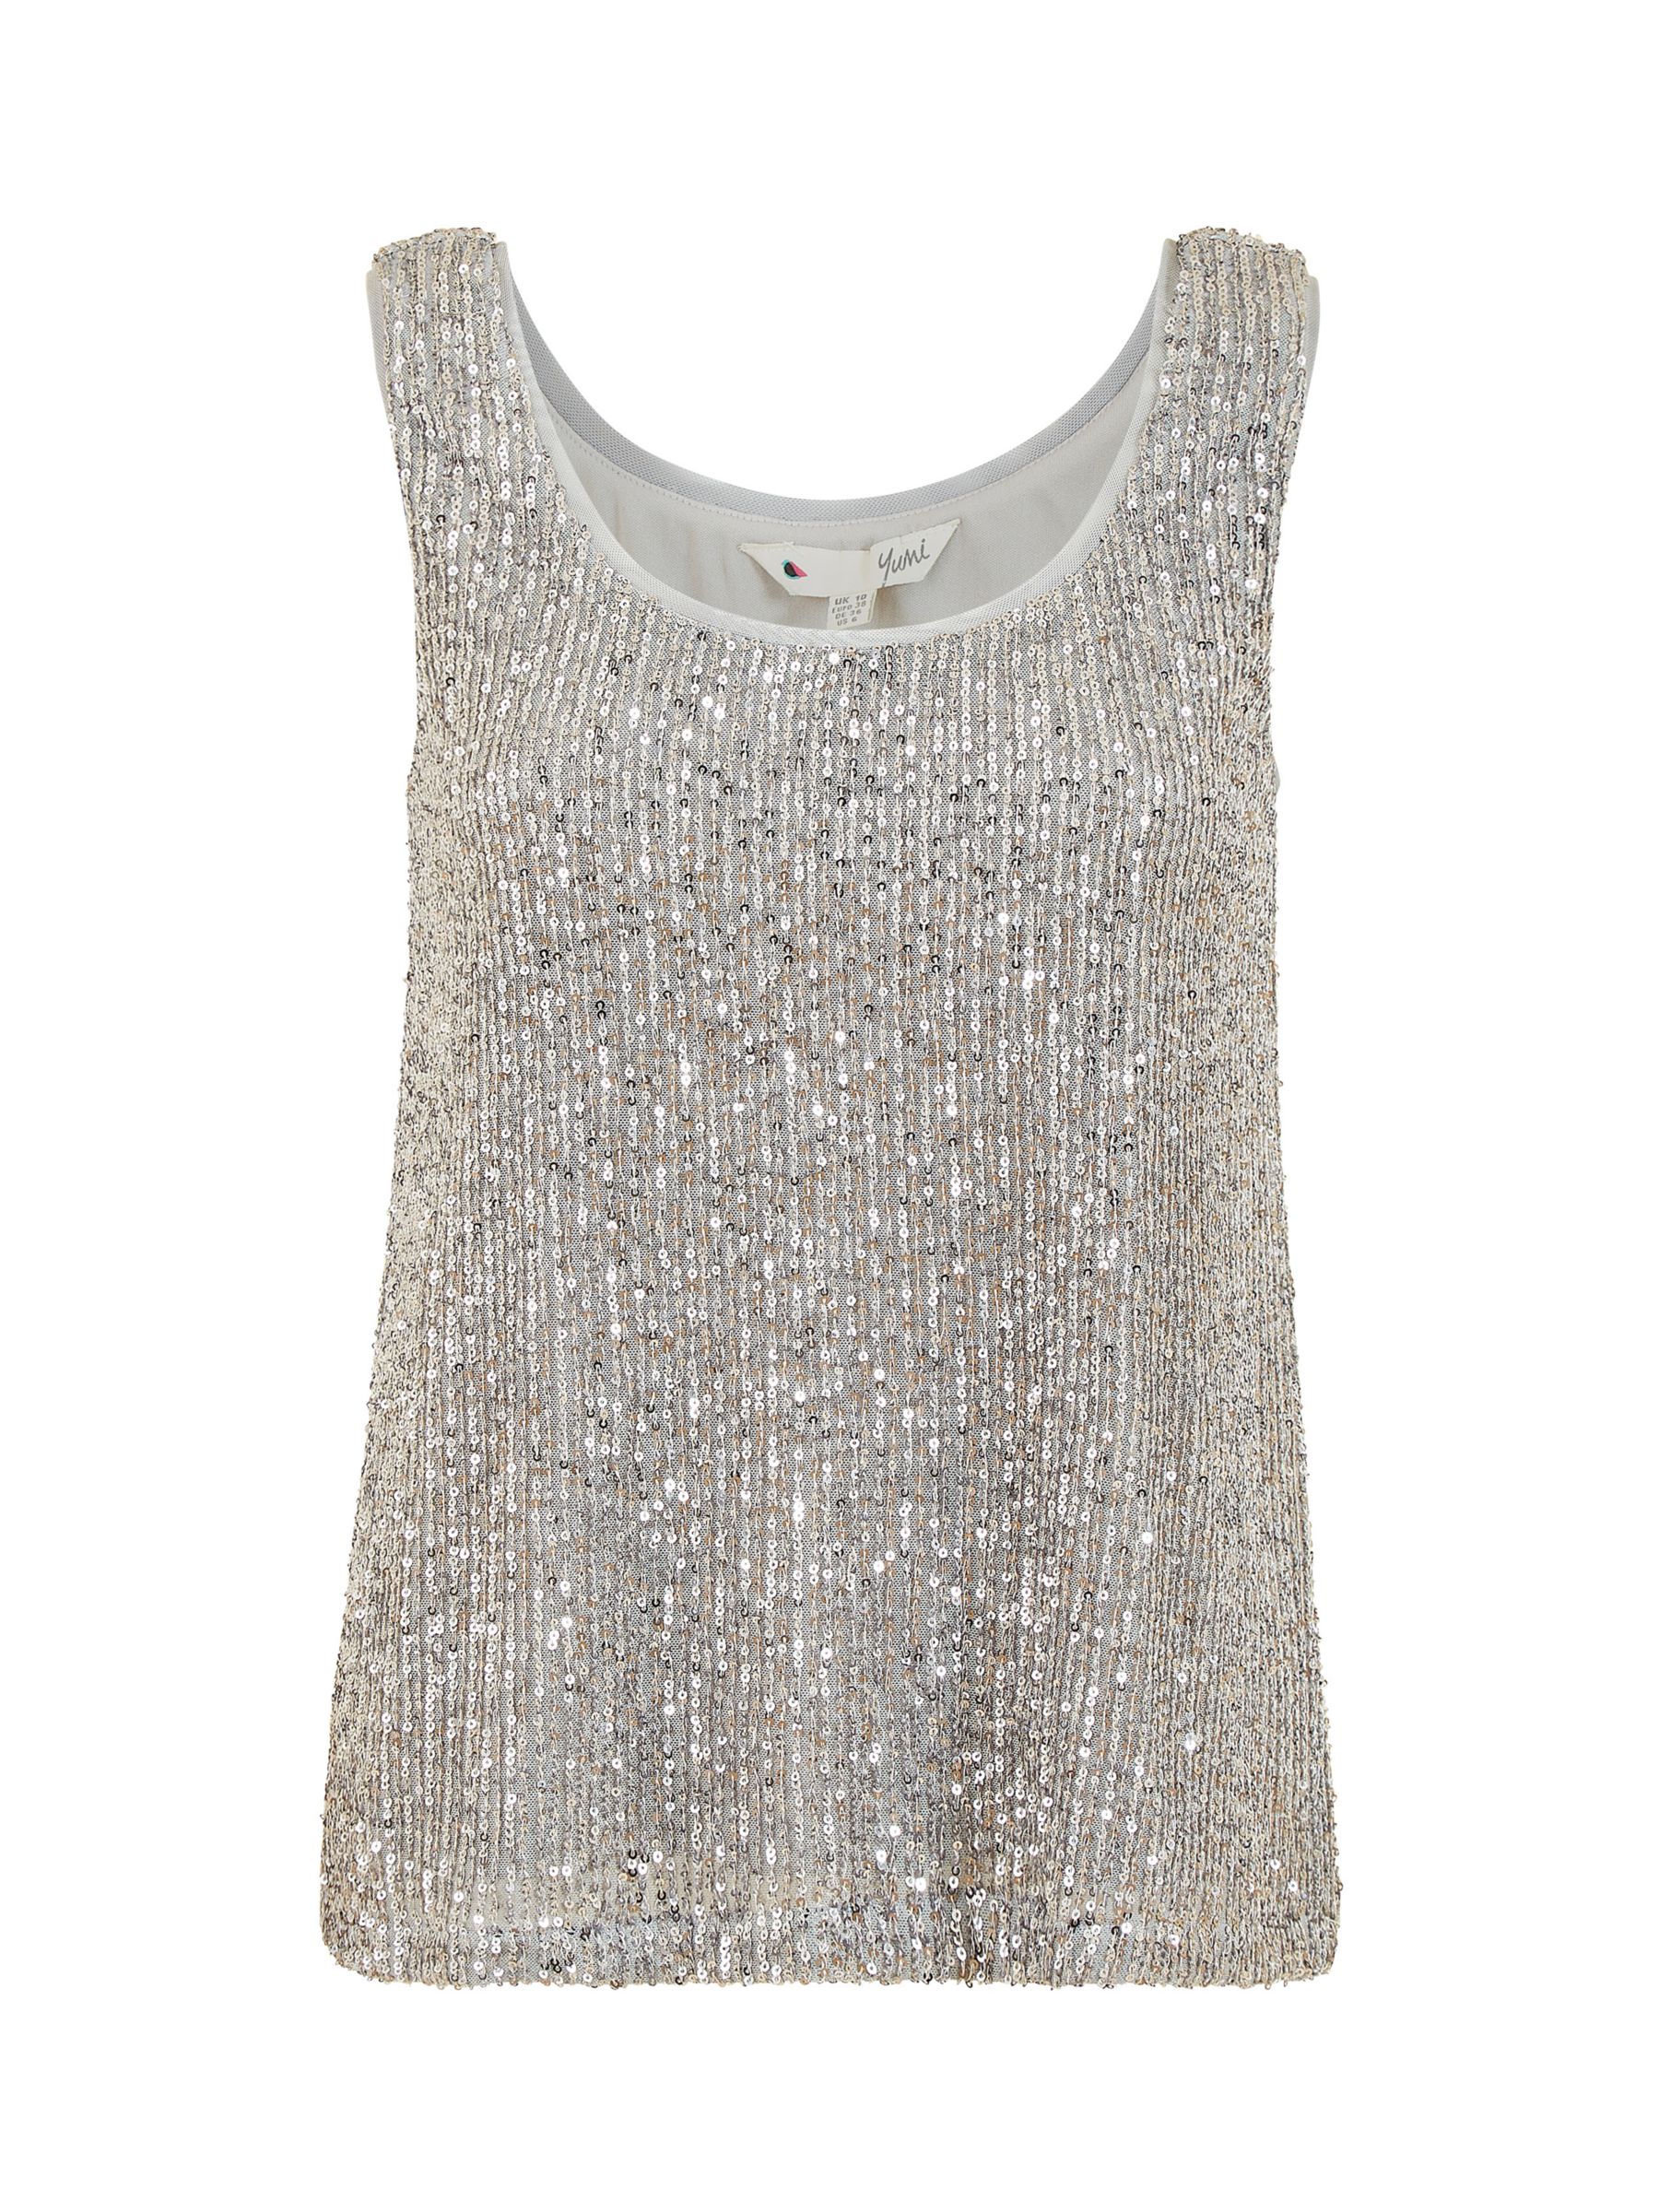 Yumi Sequin Vest Top, Silver at John Lewis & Partners